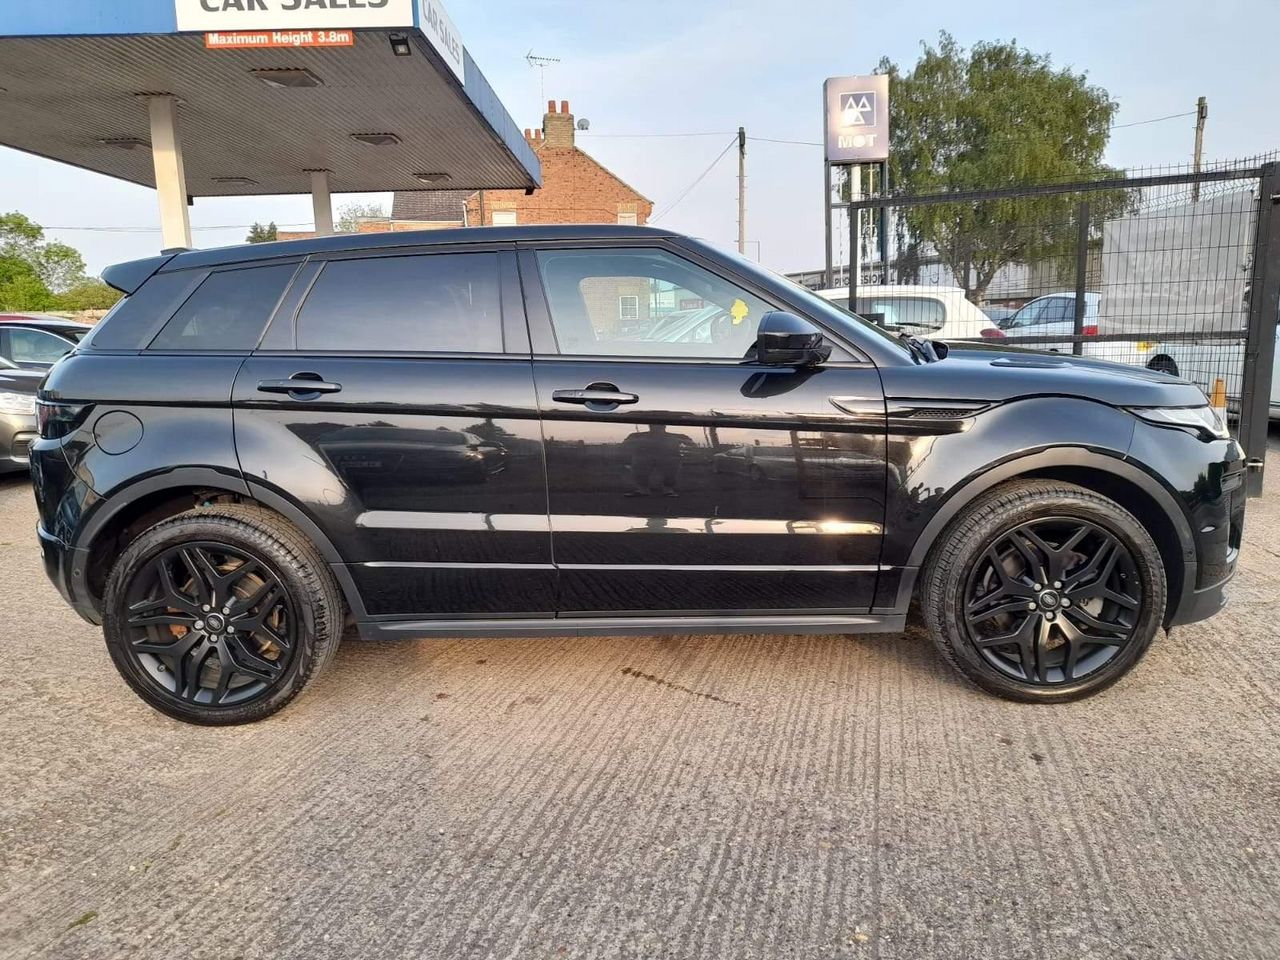 2017 Land Rover Range Rover Evoque 2.0 TD4 HSE Dynamic Auto 4WD Euro 6 (s/s) 5dr - Picture 12 of 53